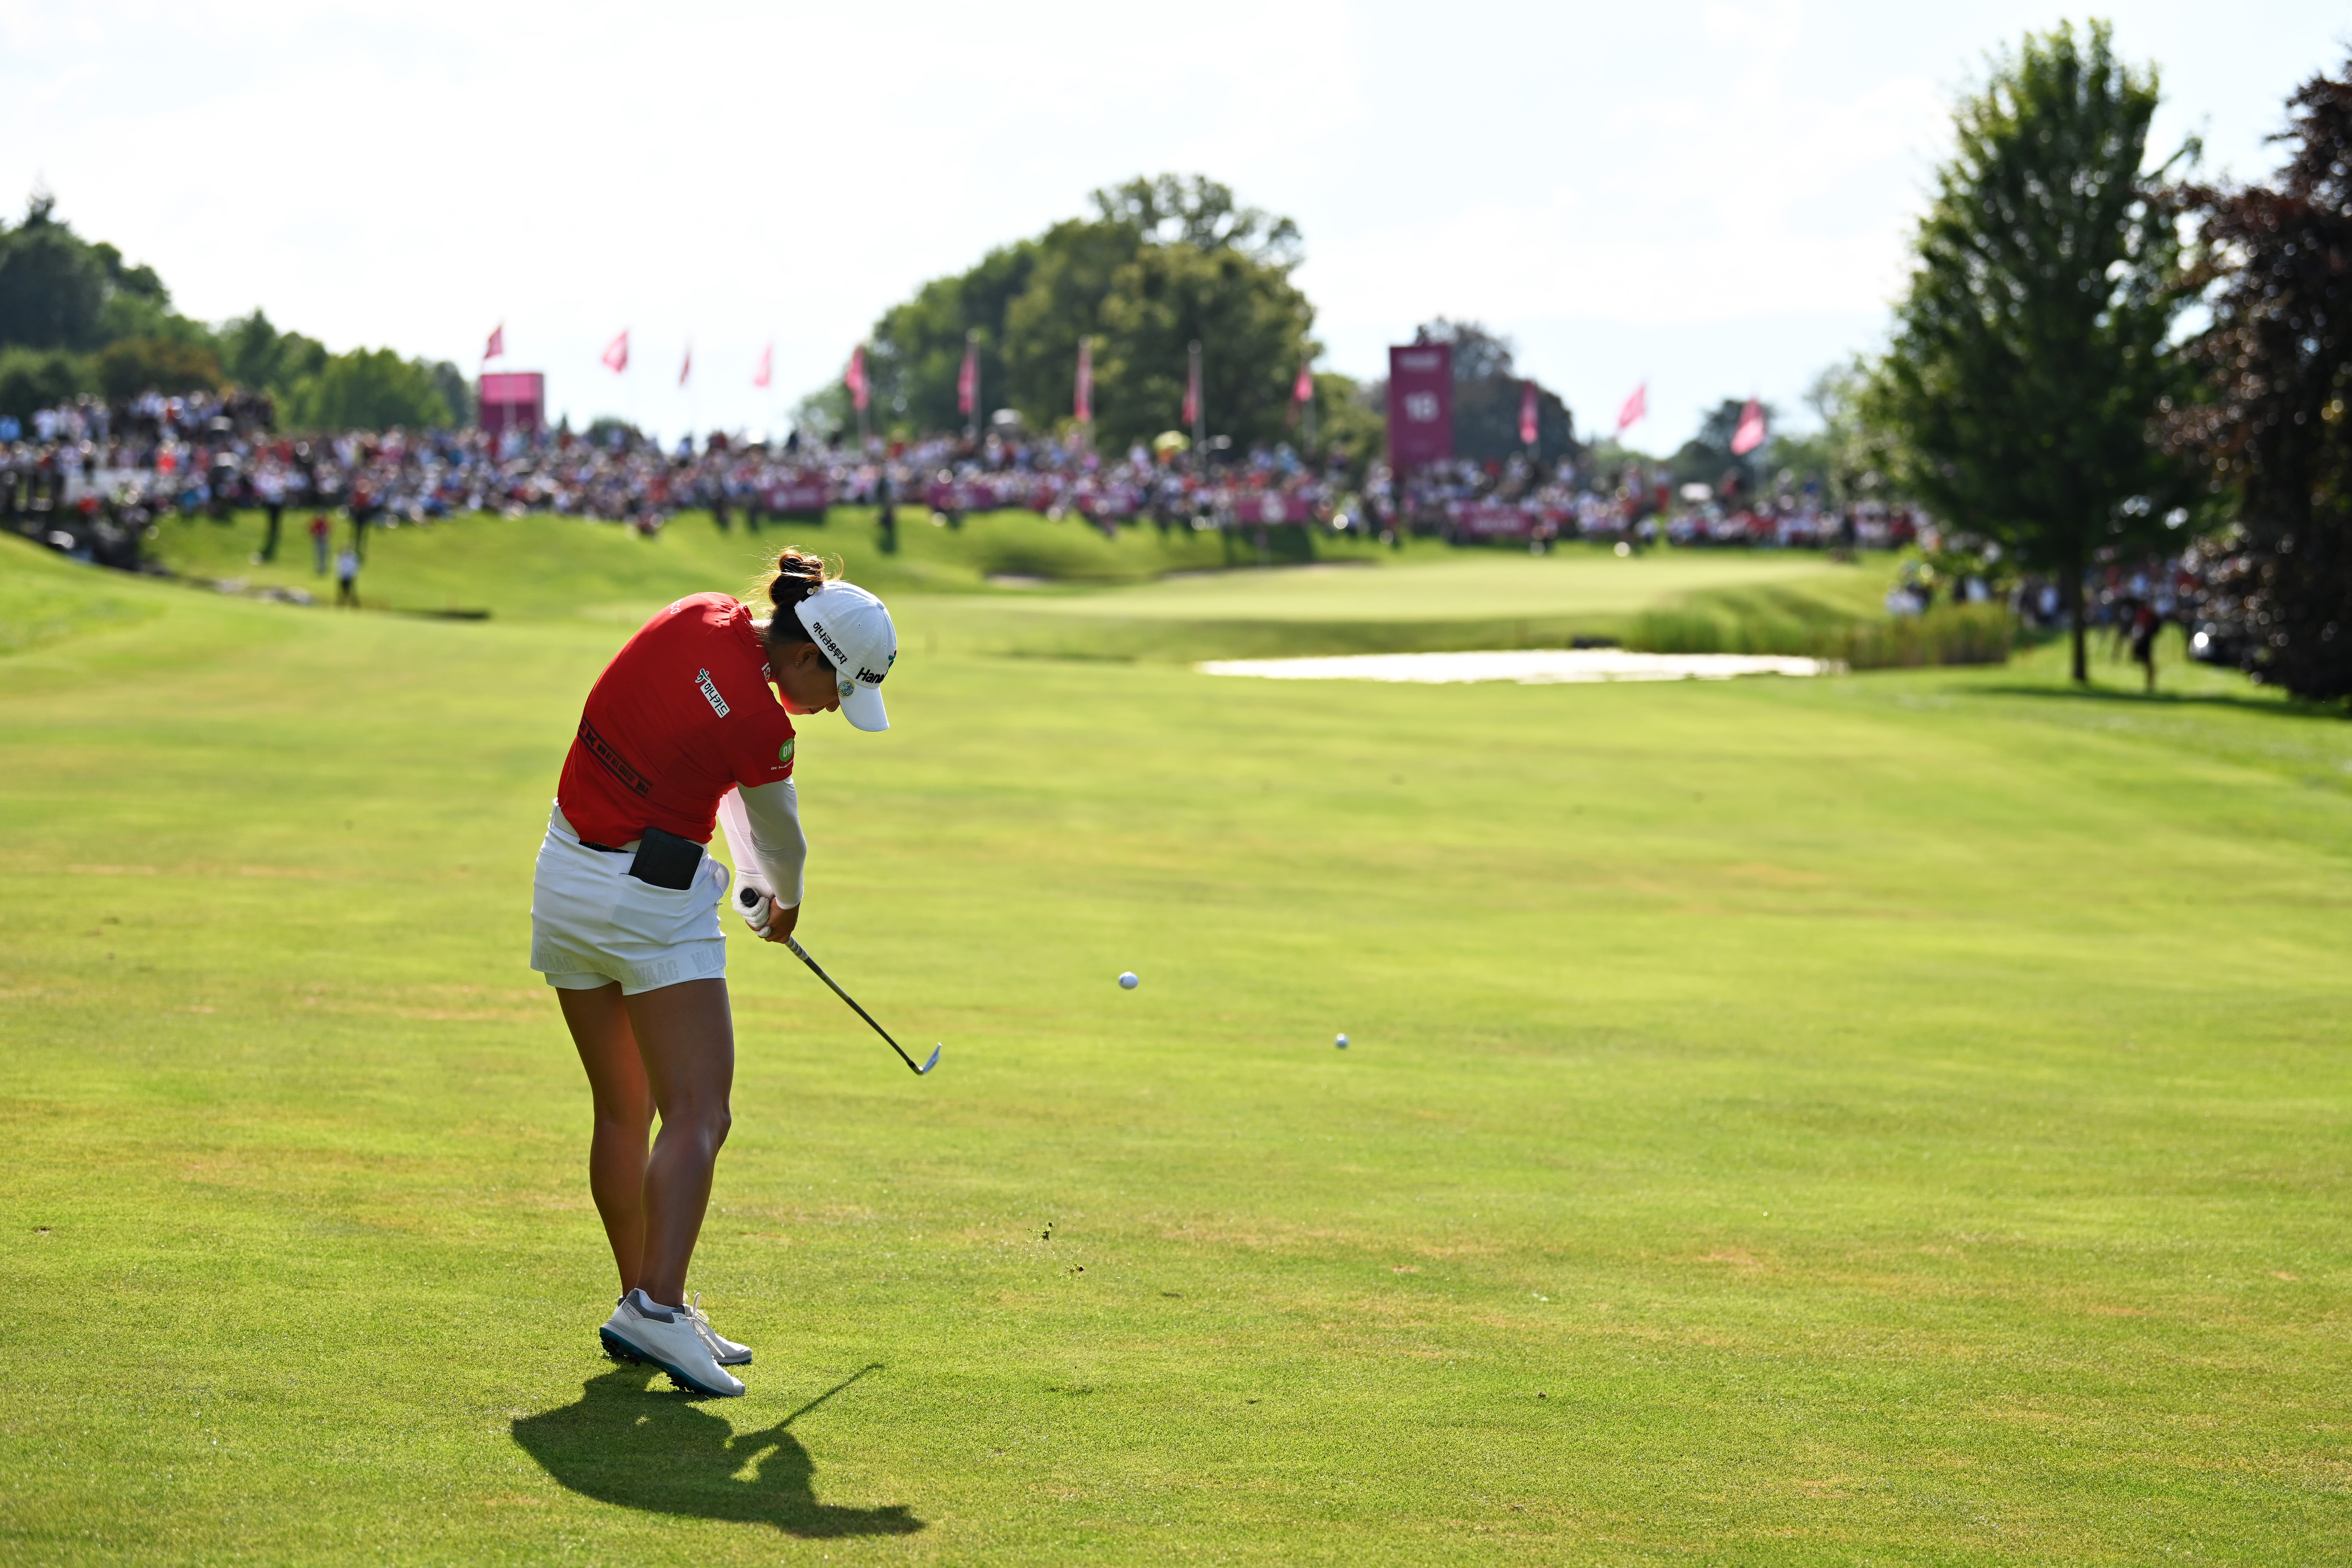 Minjee Lee plays an approach shot on the playoff hole on the eighteenth hole during day four of the The Amundi Evian Championship at Evian Resort Golf Club on July 25, 2021 in Evian-les-Bains, France. 